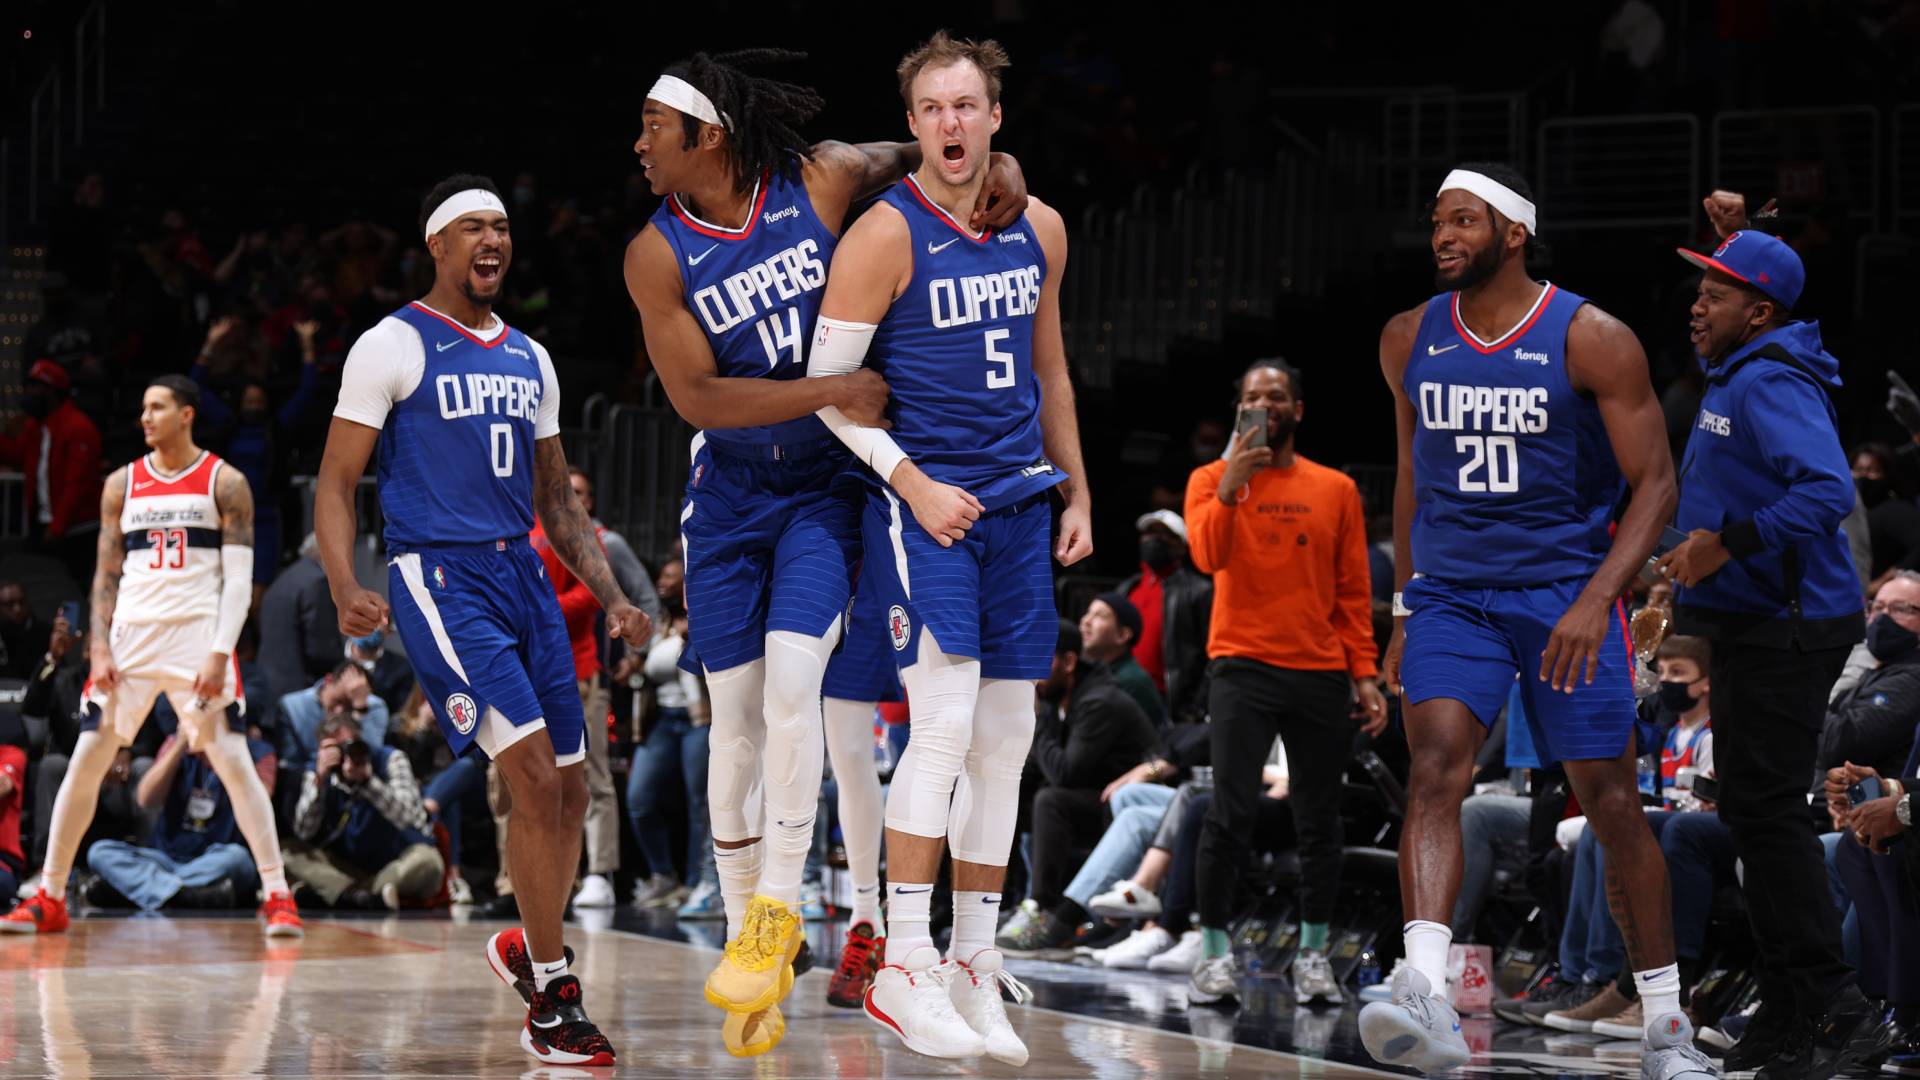 LA Clippers Comeback 35 Poin Defisit Luek Kennard Wizards 4-Point Play